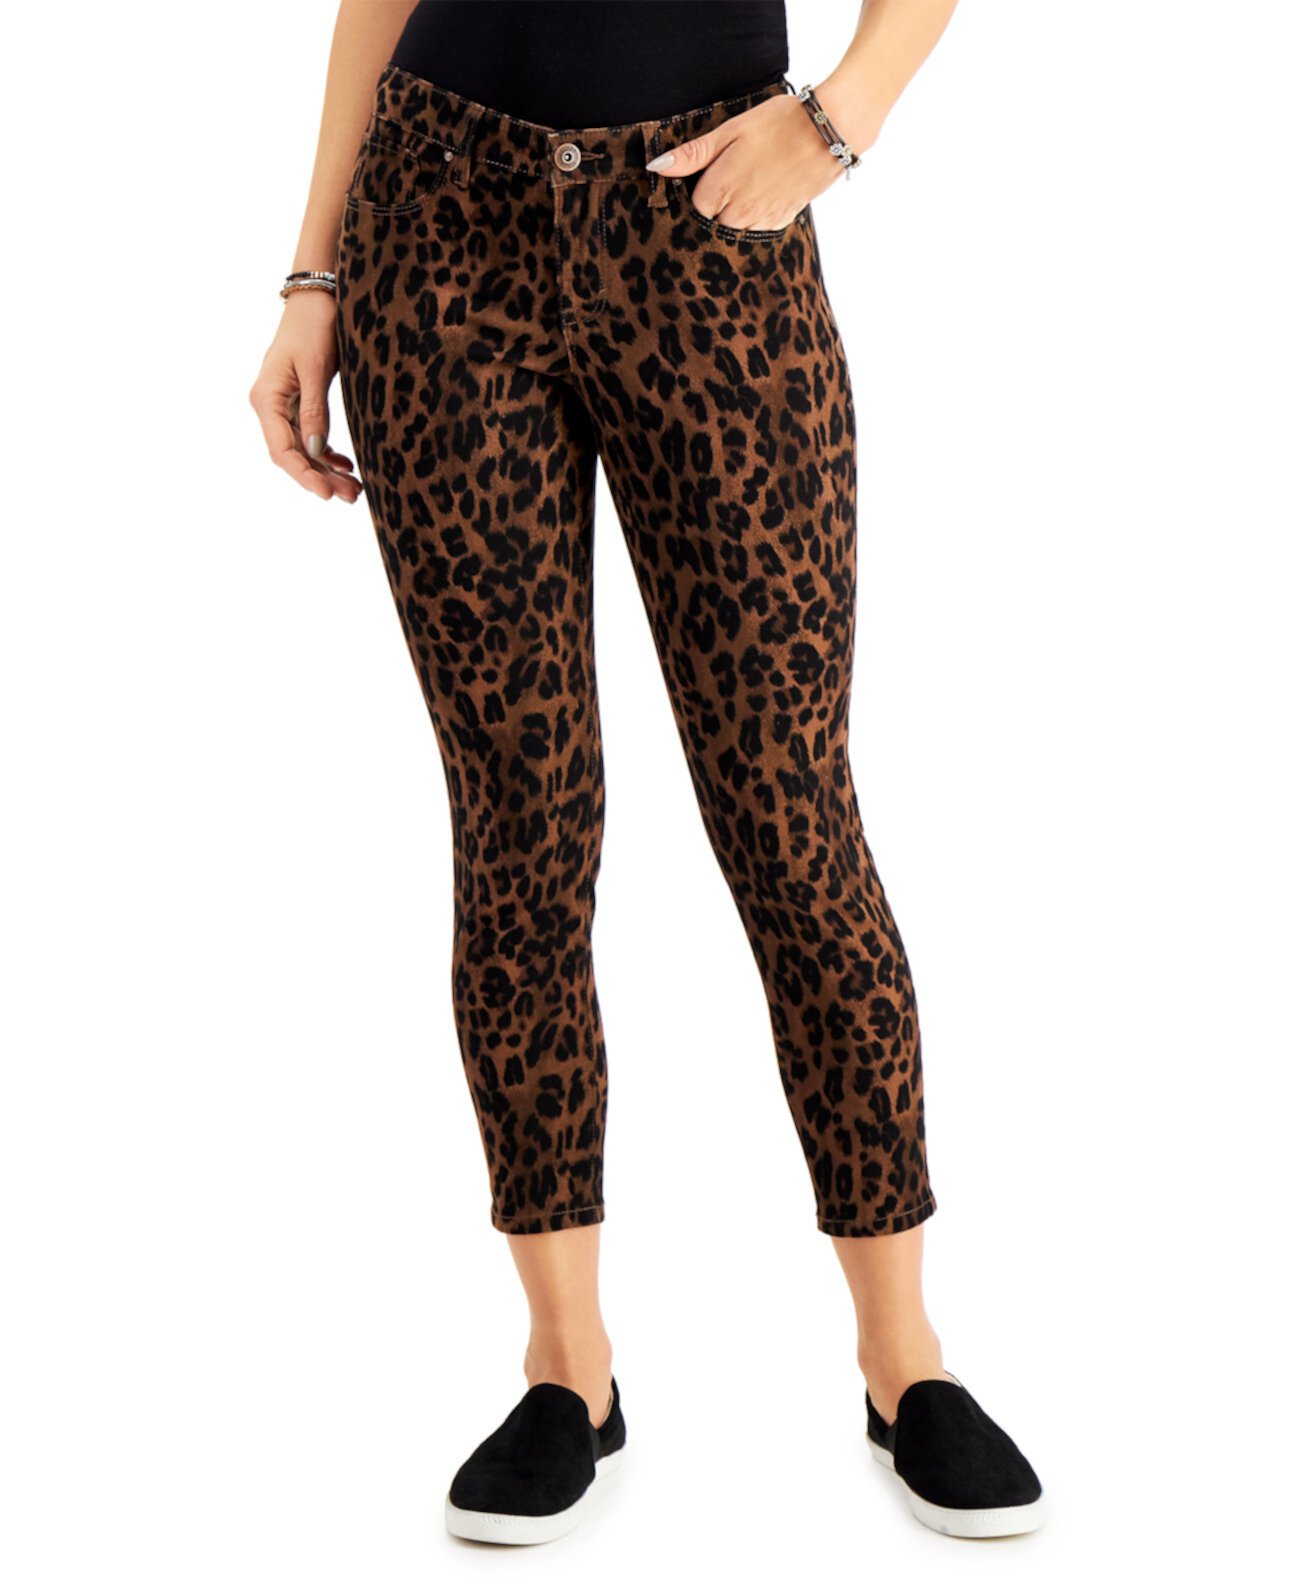 Leopard-Print Curvy Skinny Jeans, Created for Macy's Style & Co